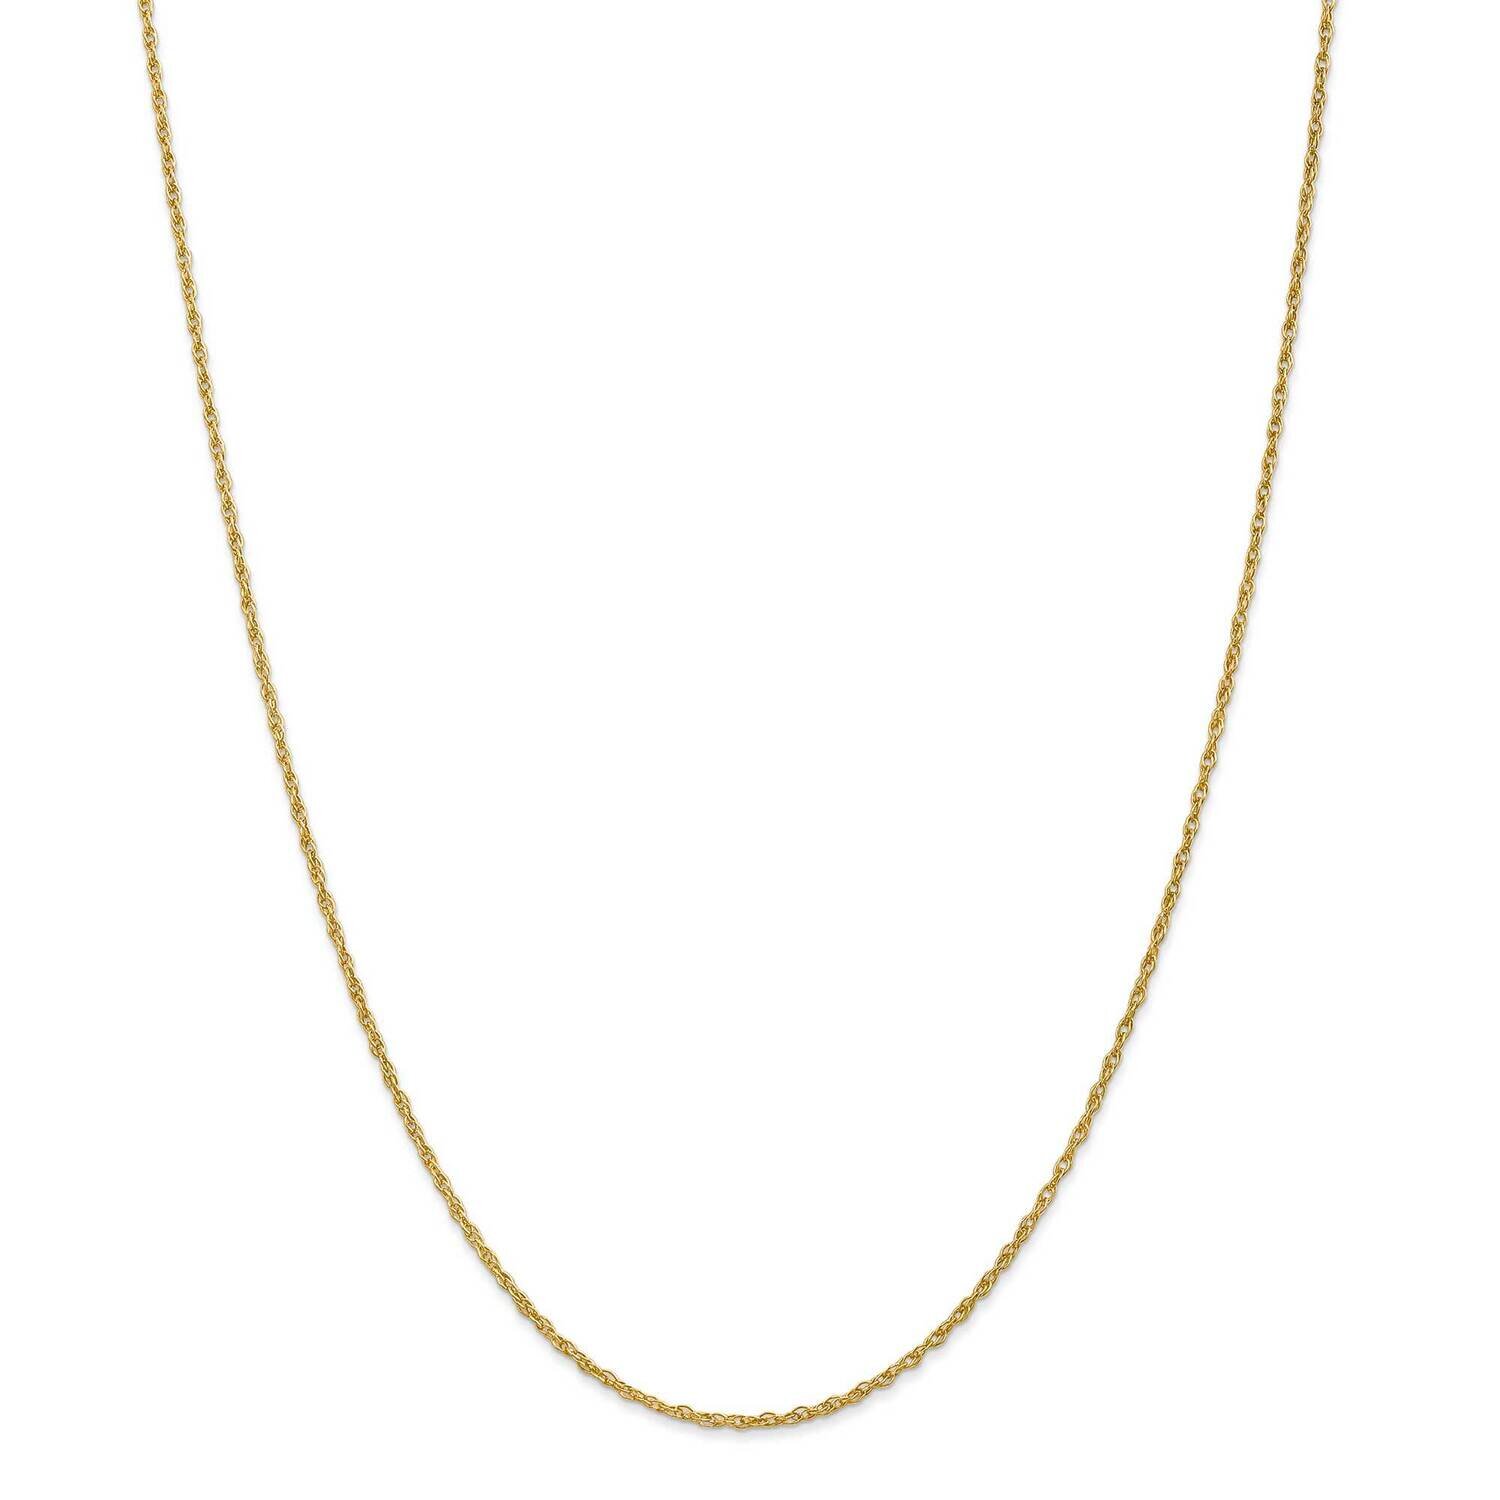 1.3mm Heavy-Baby Rope Chain 22 Inch 14k Gold PEN6-22